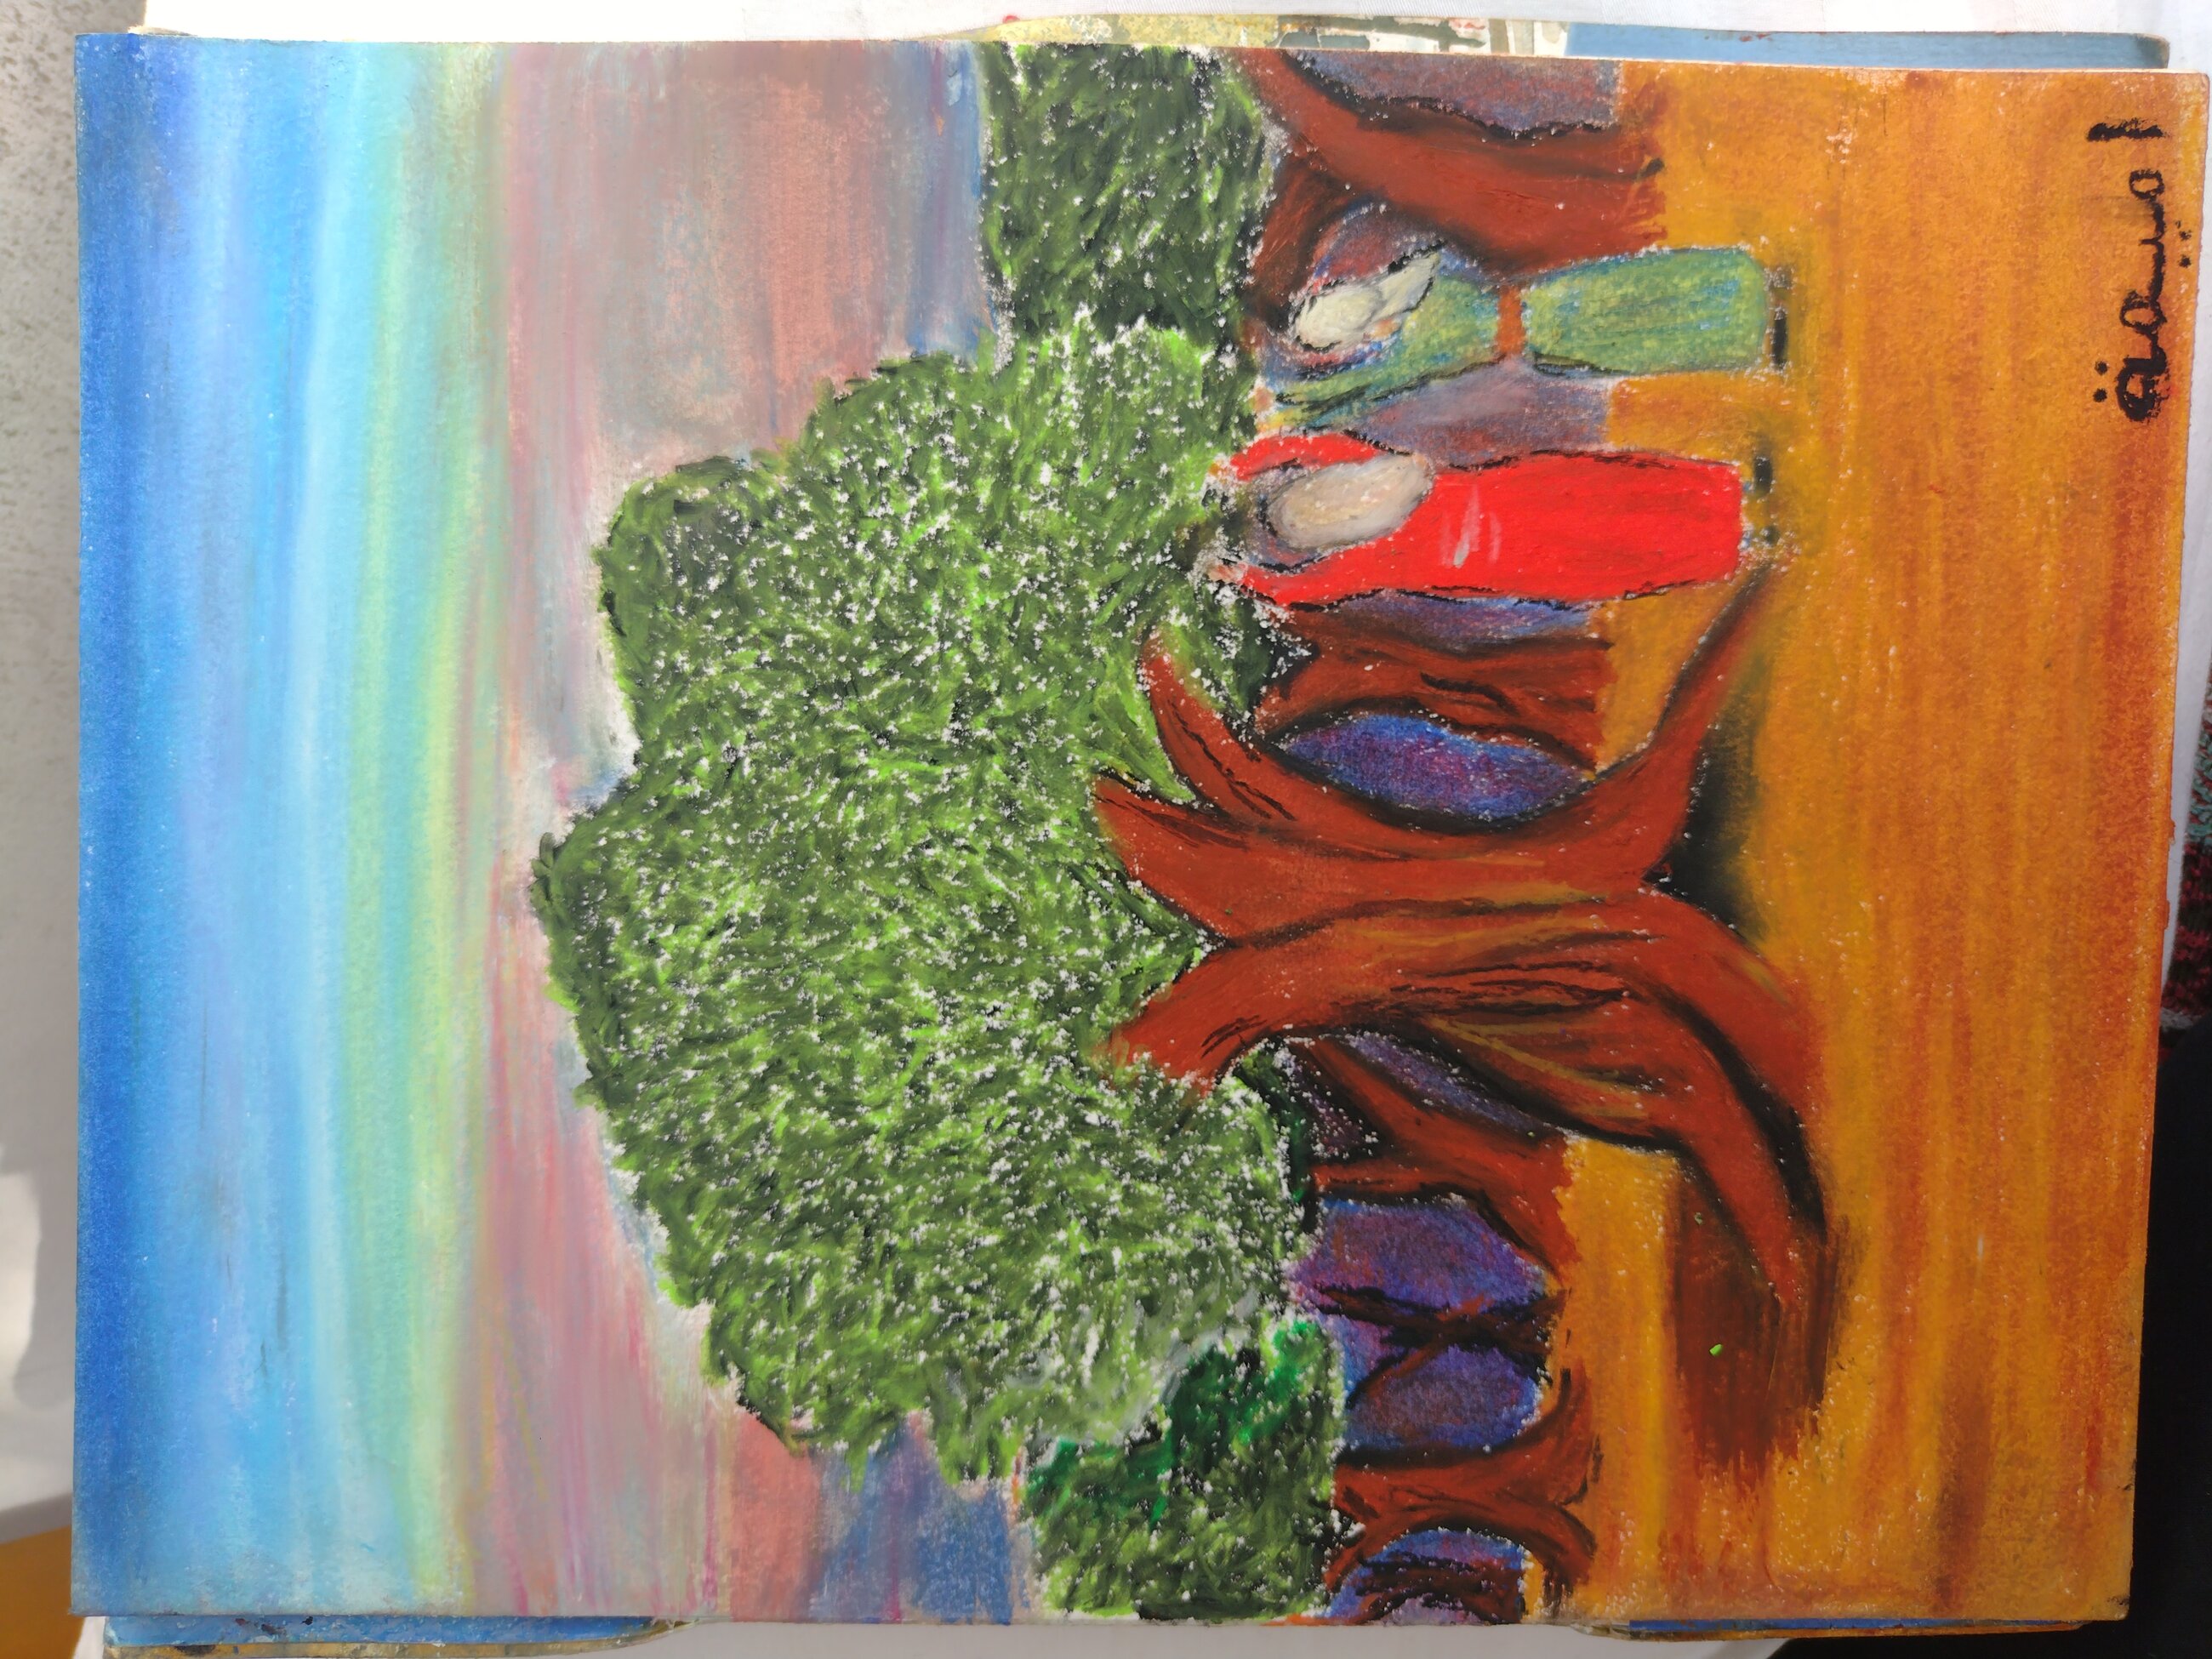 My oil pastel drawing of Palestinian women by an olive tree